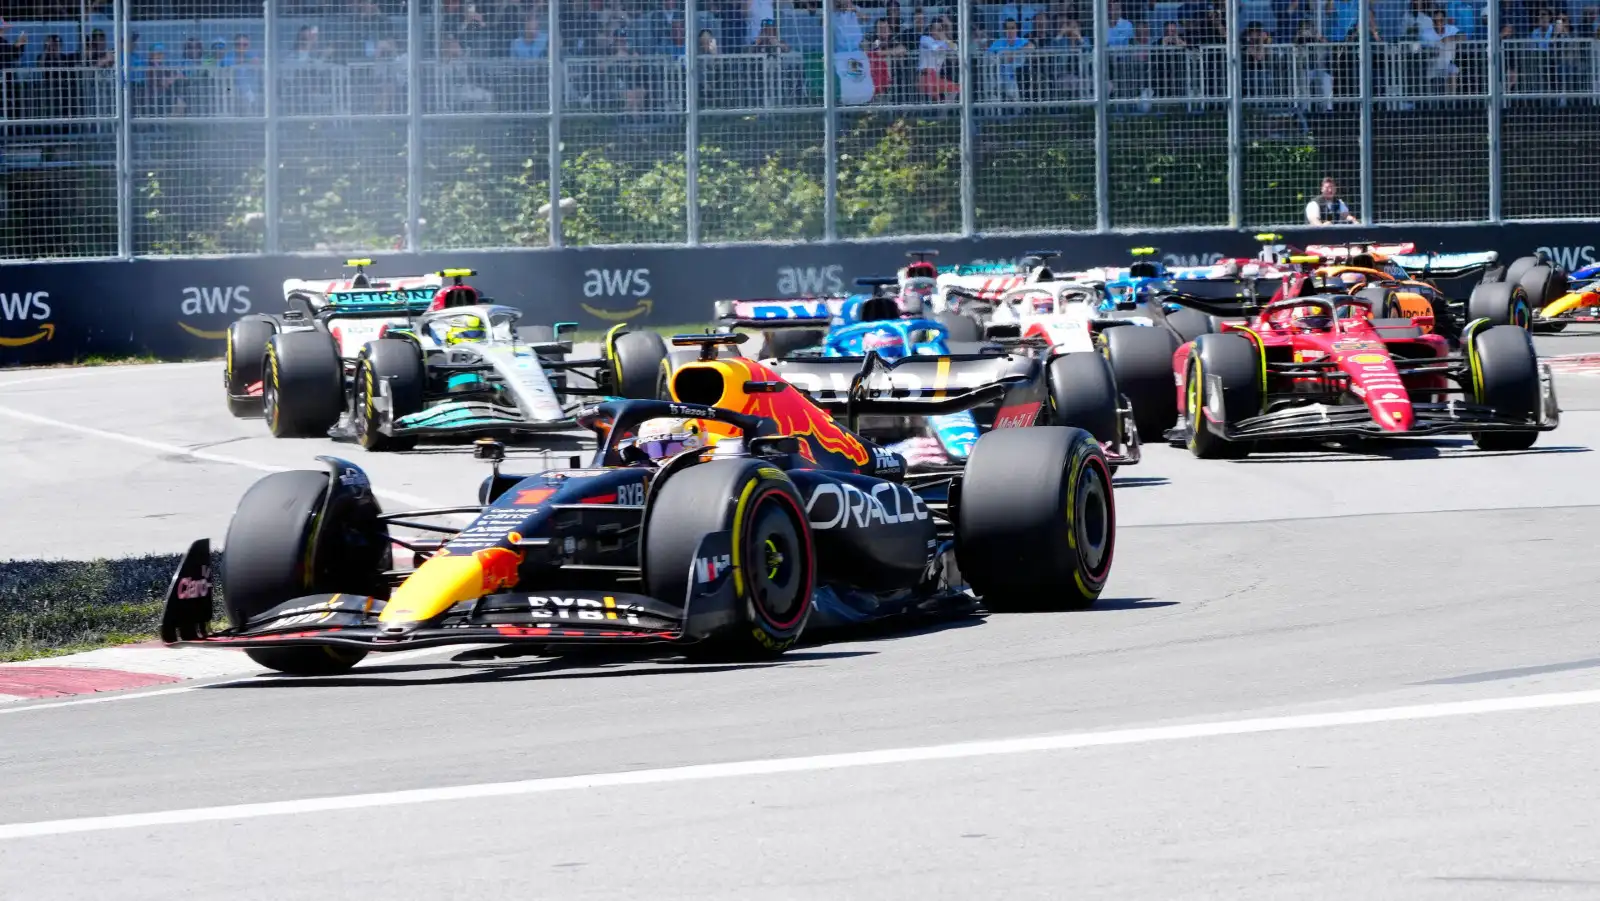 Red Bull's Max Verstappen leads the field at the Canadian Grand Prix. Montreal, June 2022.